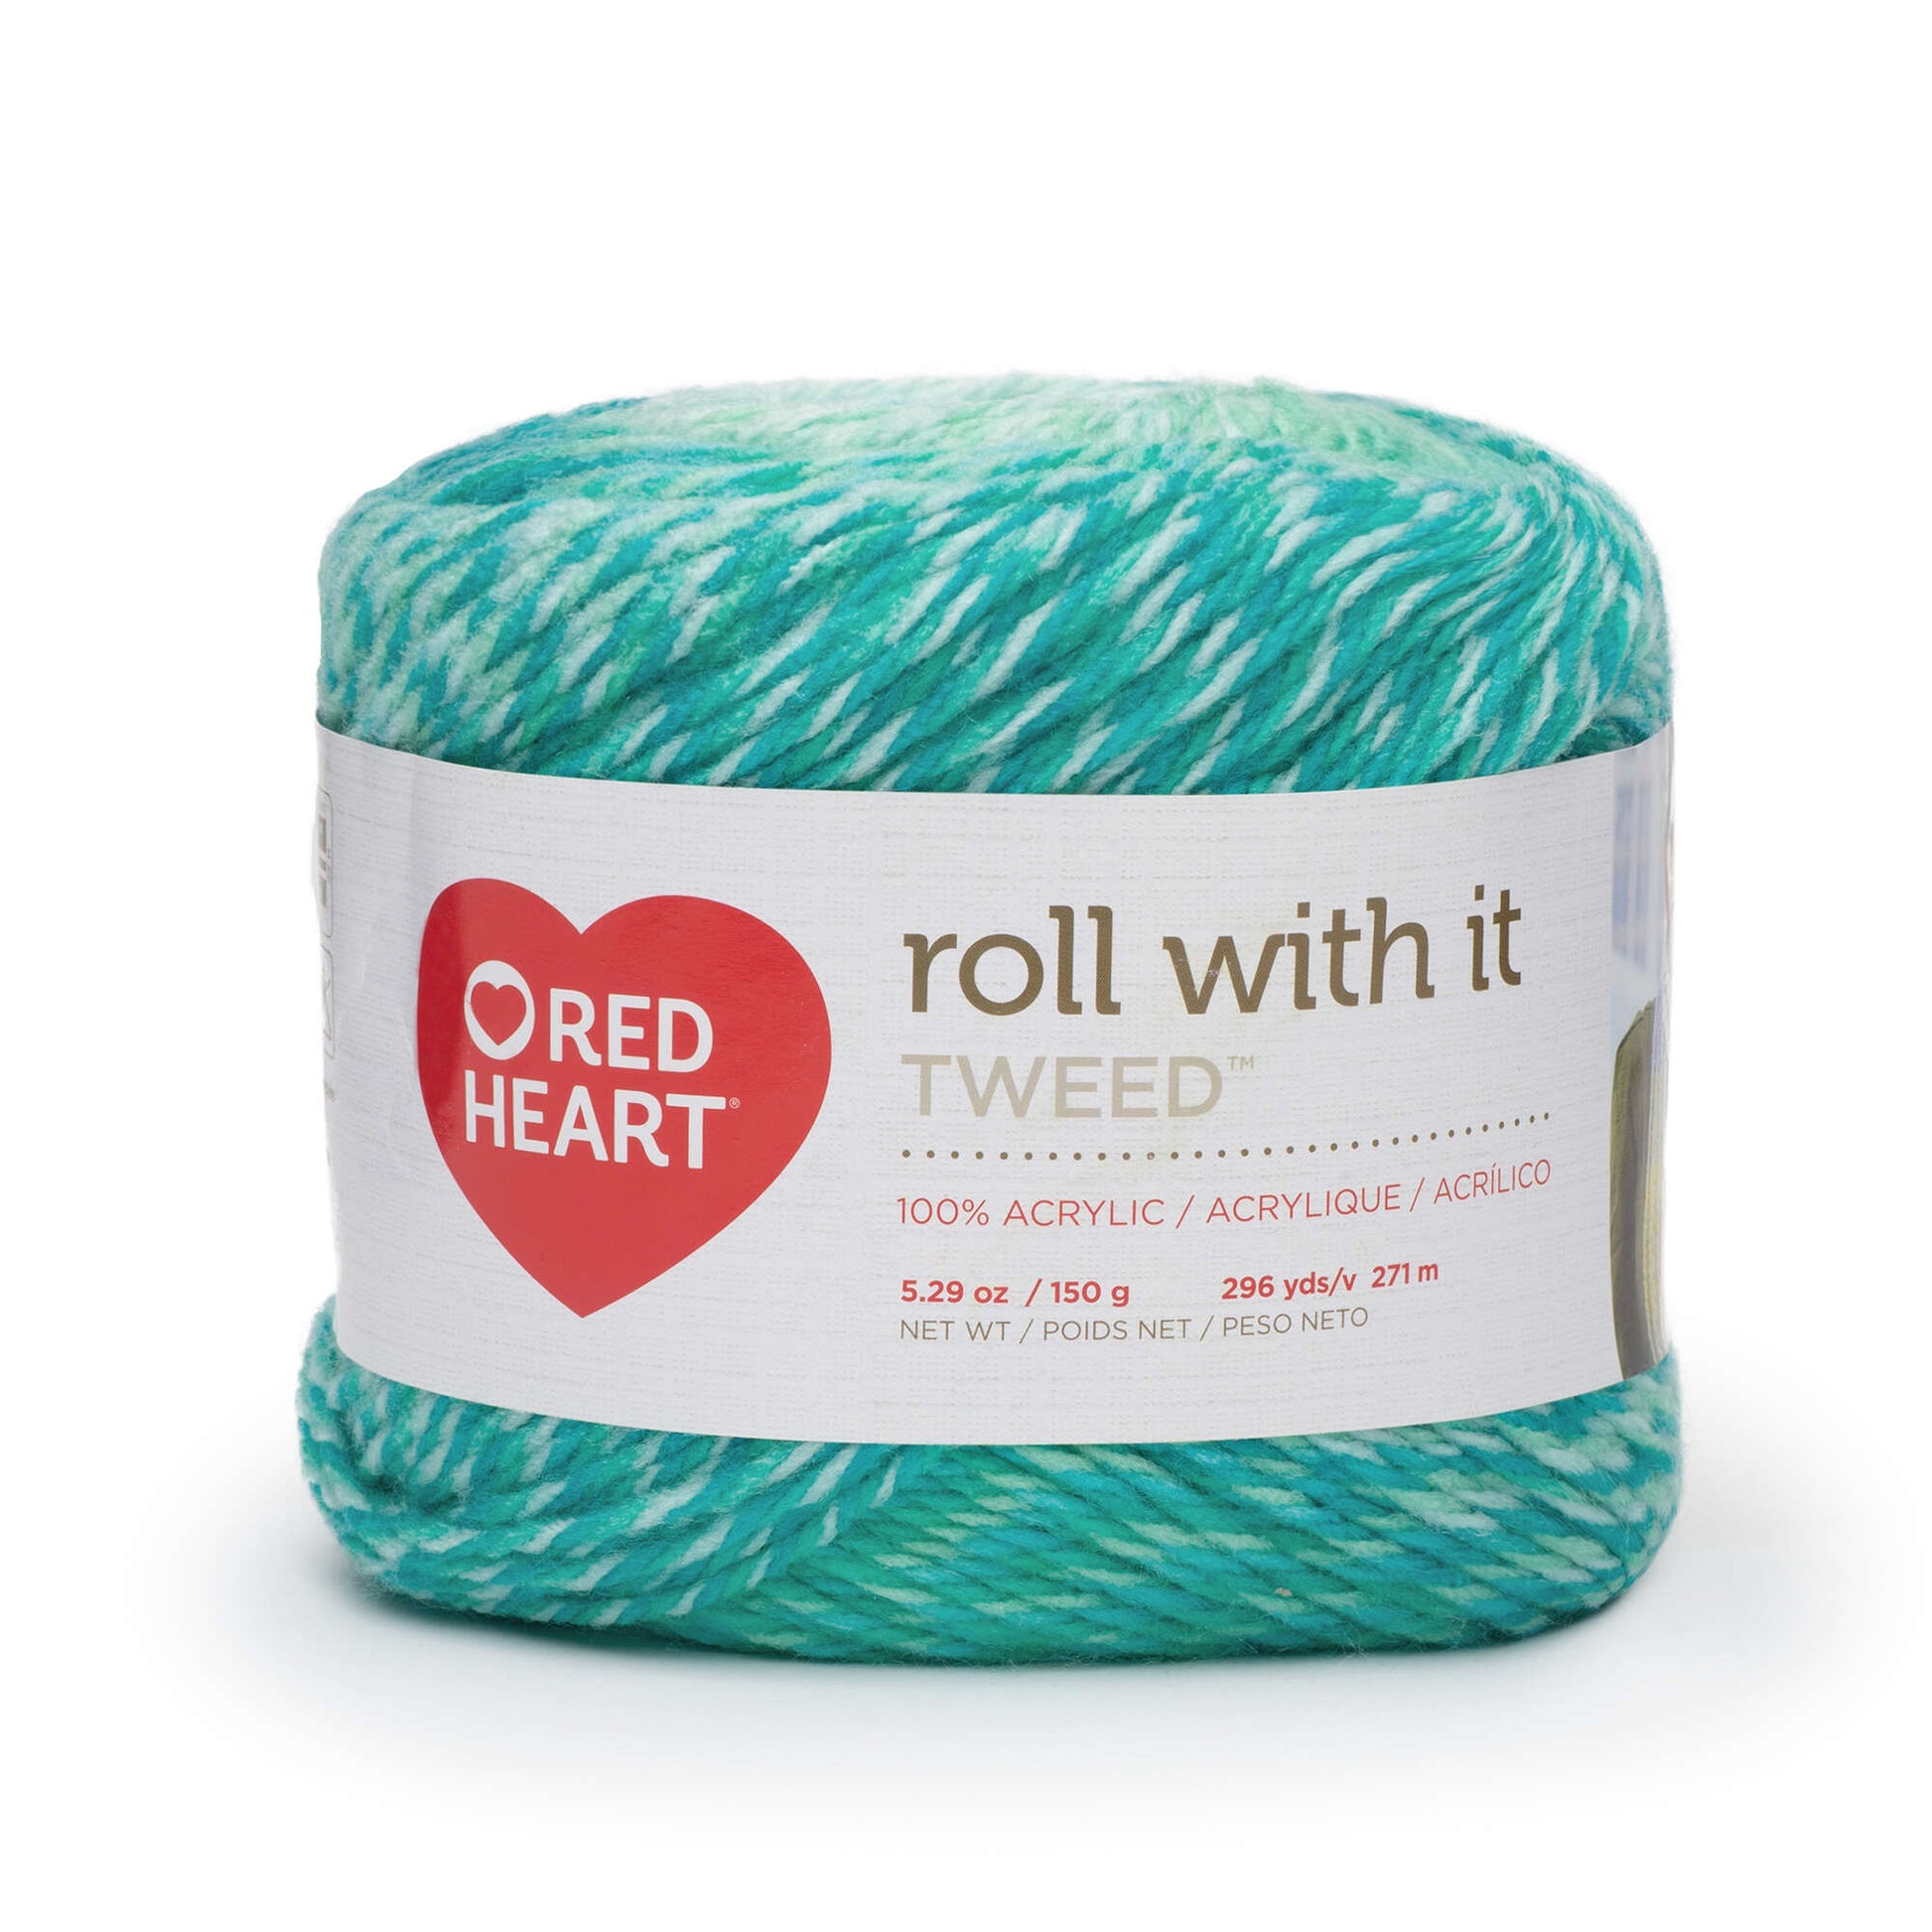 Red Heart Roll With It Tweed Yarn - Discontinued shades